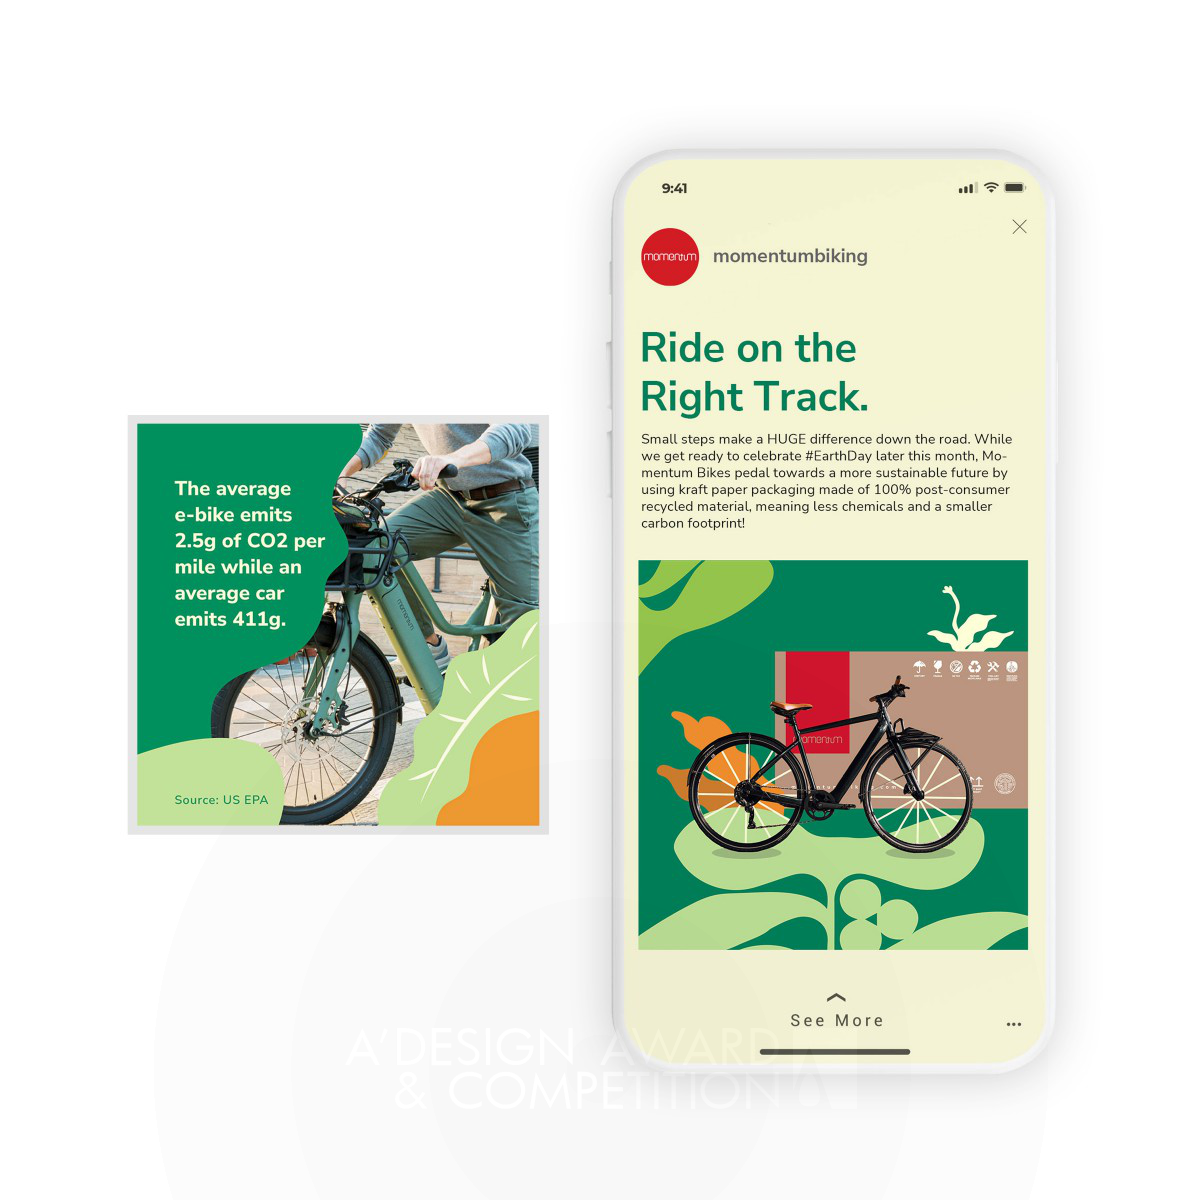 RedPeak Global wins Bronze at the prestigious A' Advertising, Marketing and Communication Design Award with Ride on the Right Track Social Media Campaign.